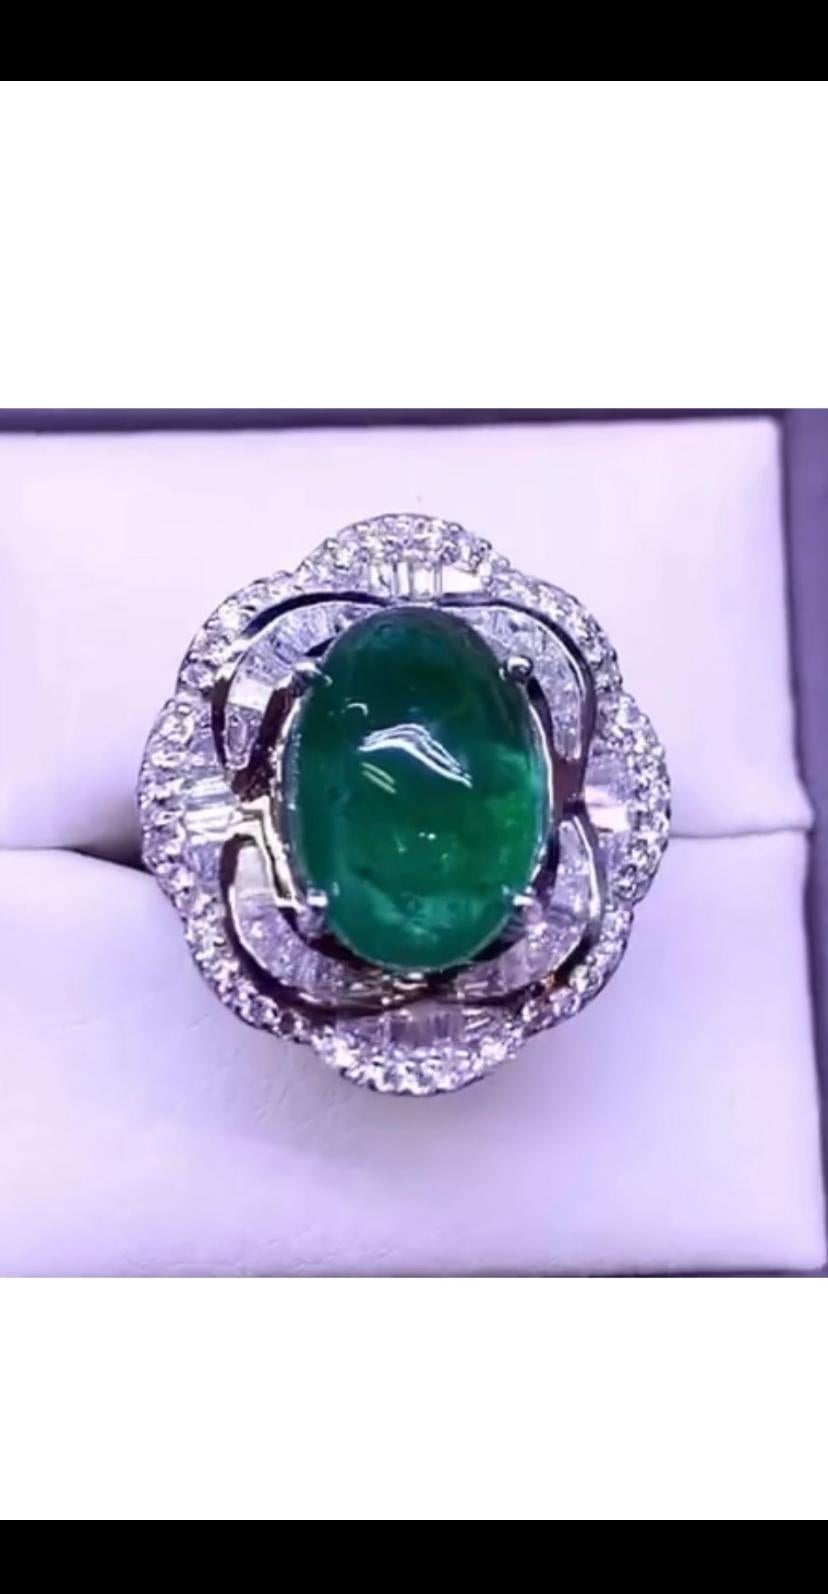 Gorgeous flowers design for this refined and chic ring , a very exclusive style.
Ring come in 18k gold with natural Zambia Emerald in perfect oval cabochon cut of 7,64 , fine quality, amazing color and grade, and baguettes and round brilliant cut